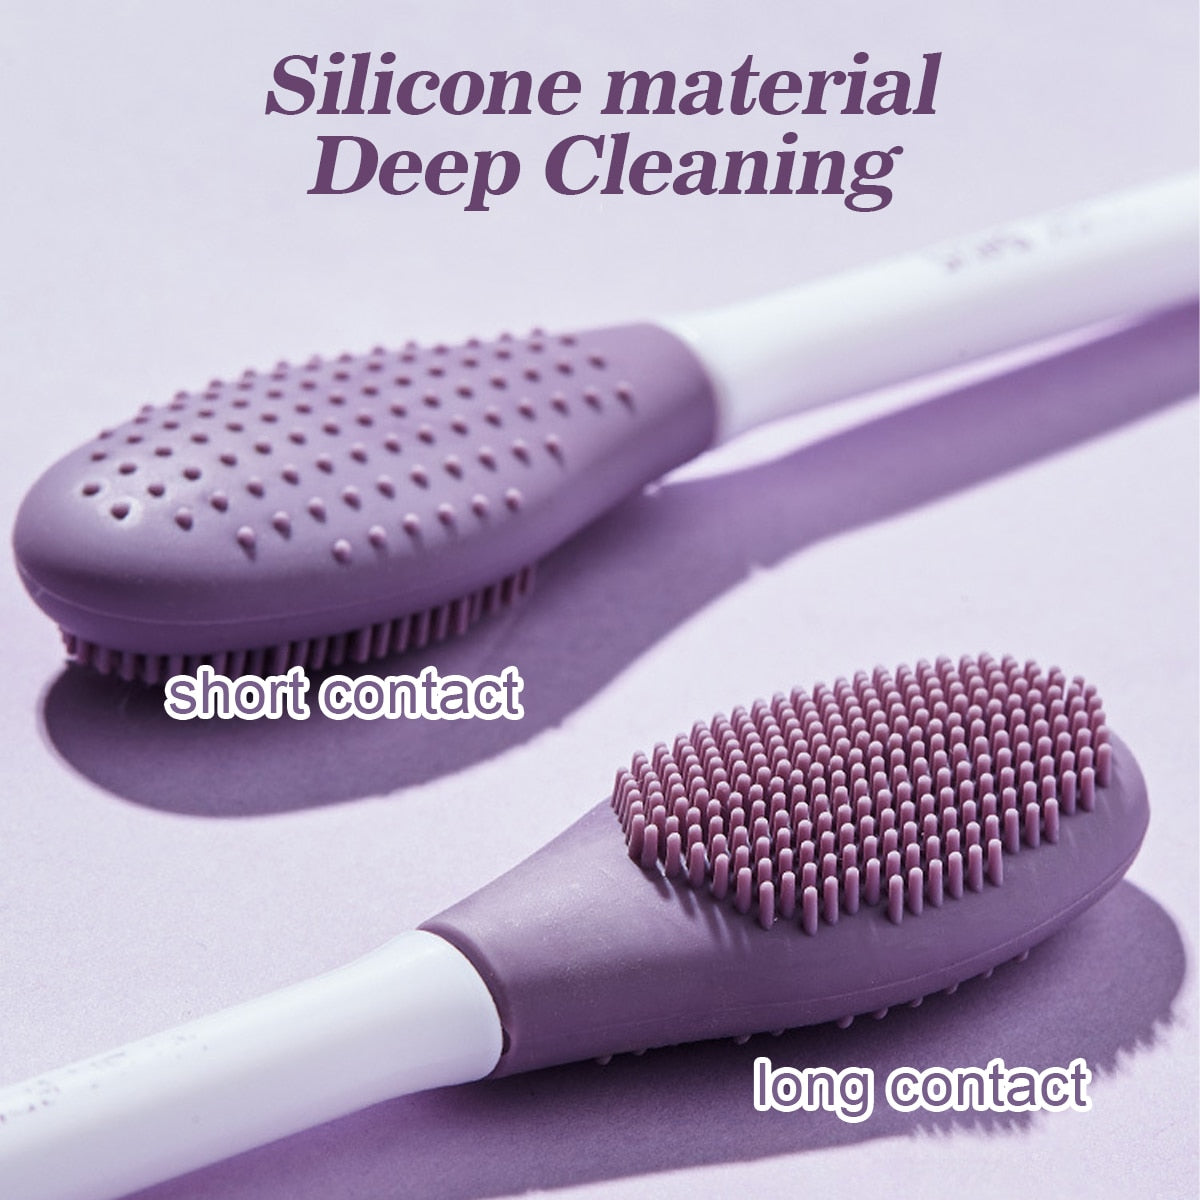 SkinMask Duo - The 2-in-1 Silicone Brush